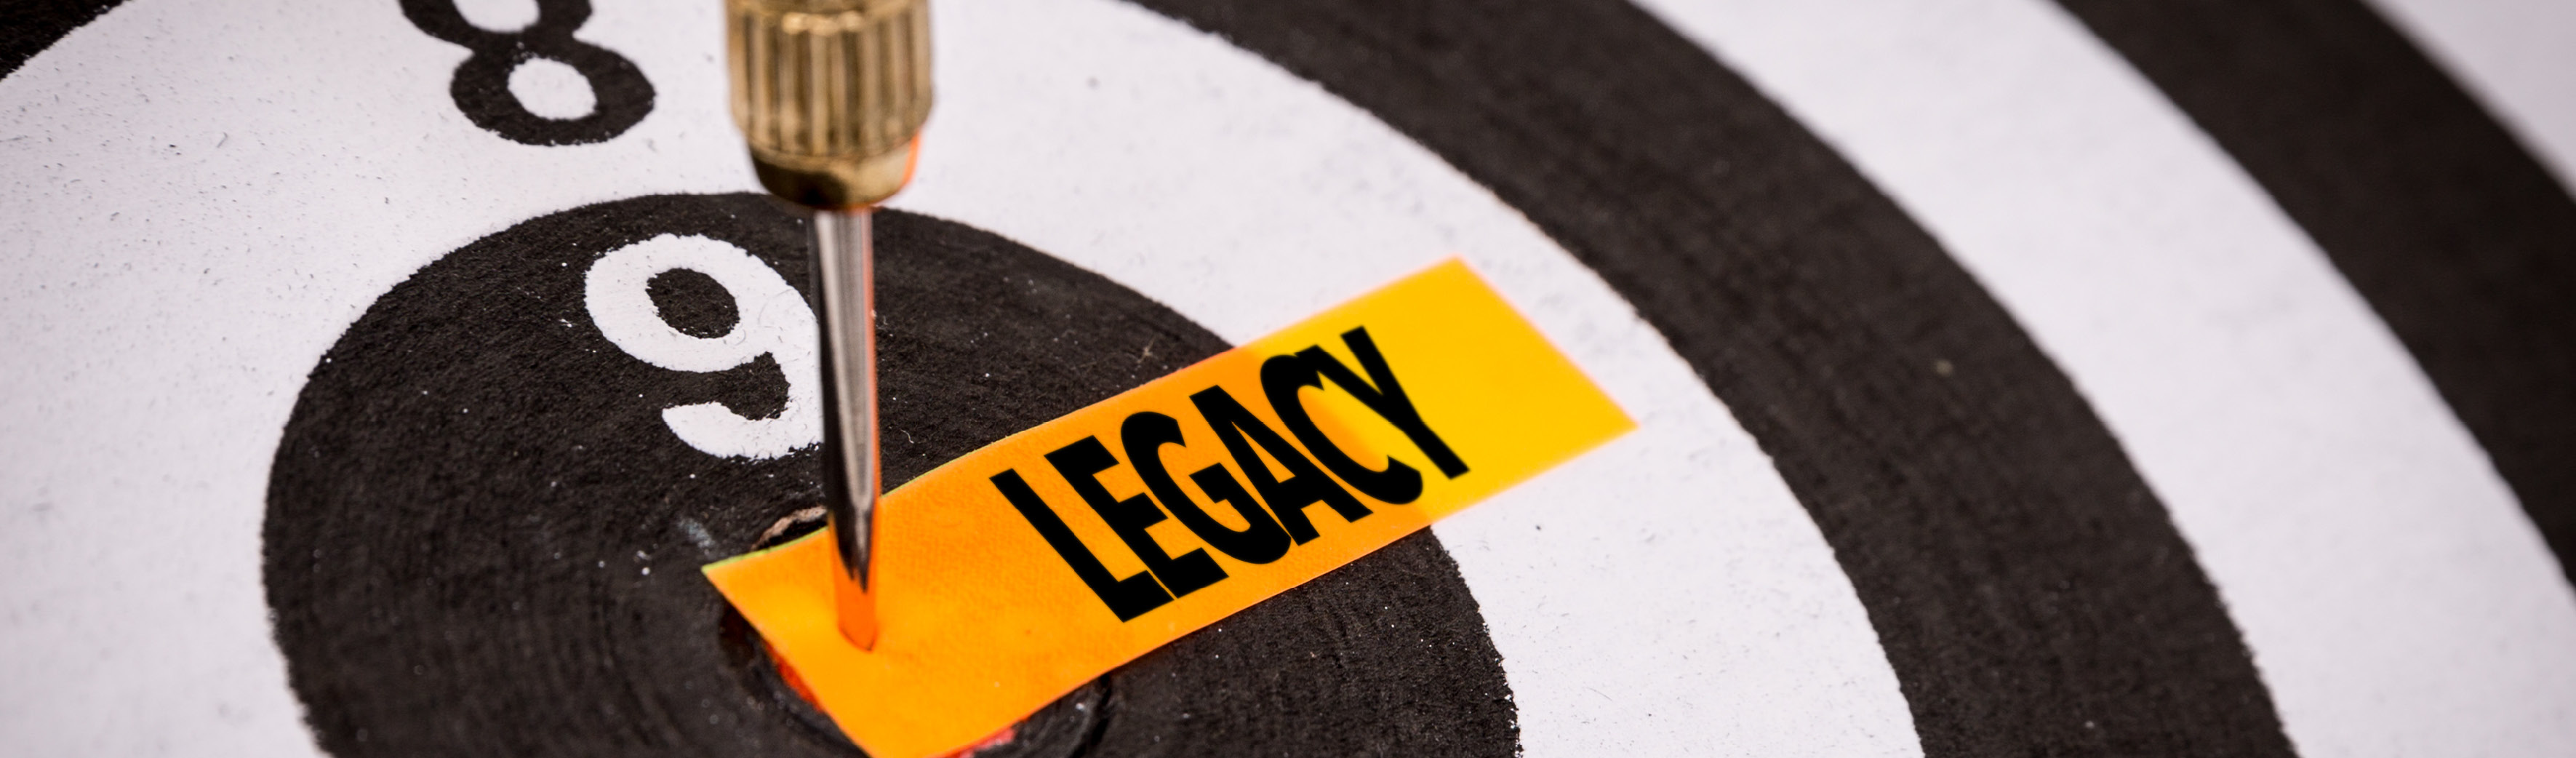 How You Can Build A Legacy